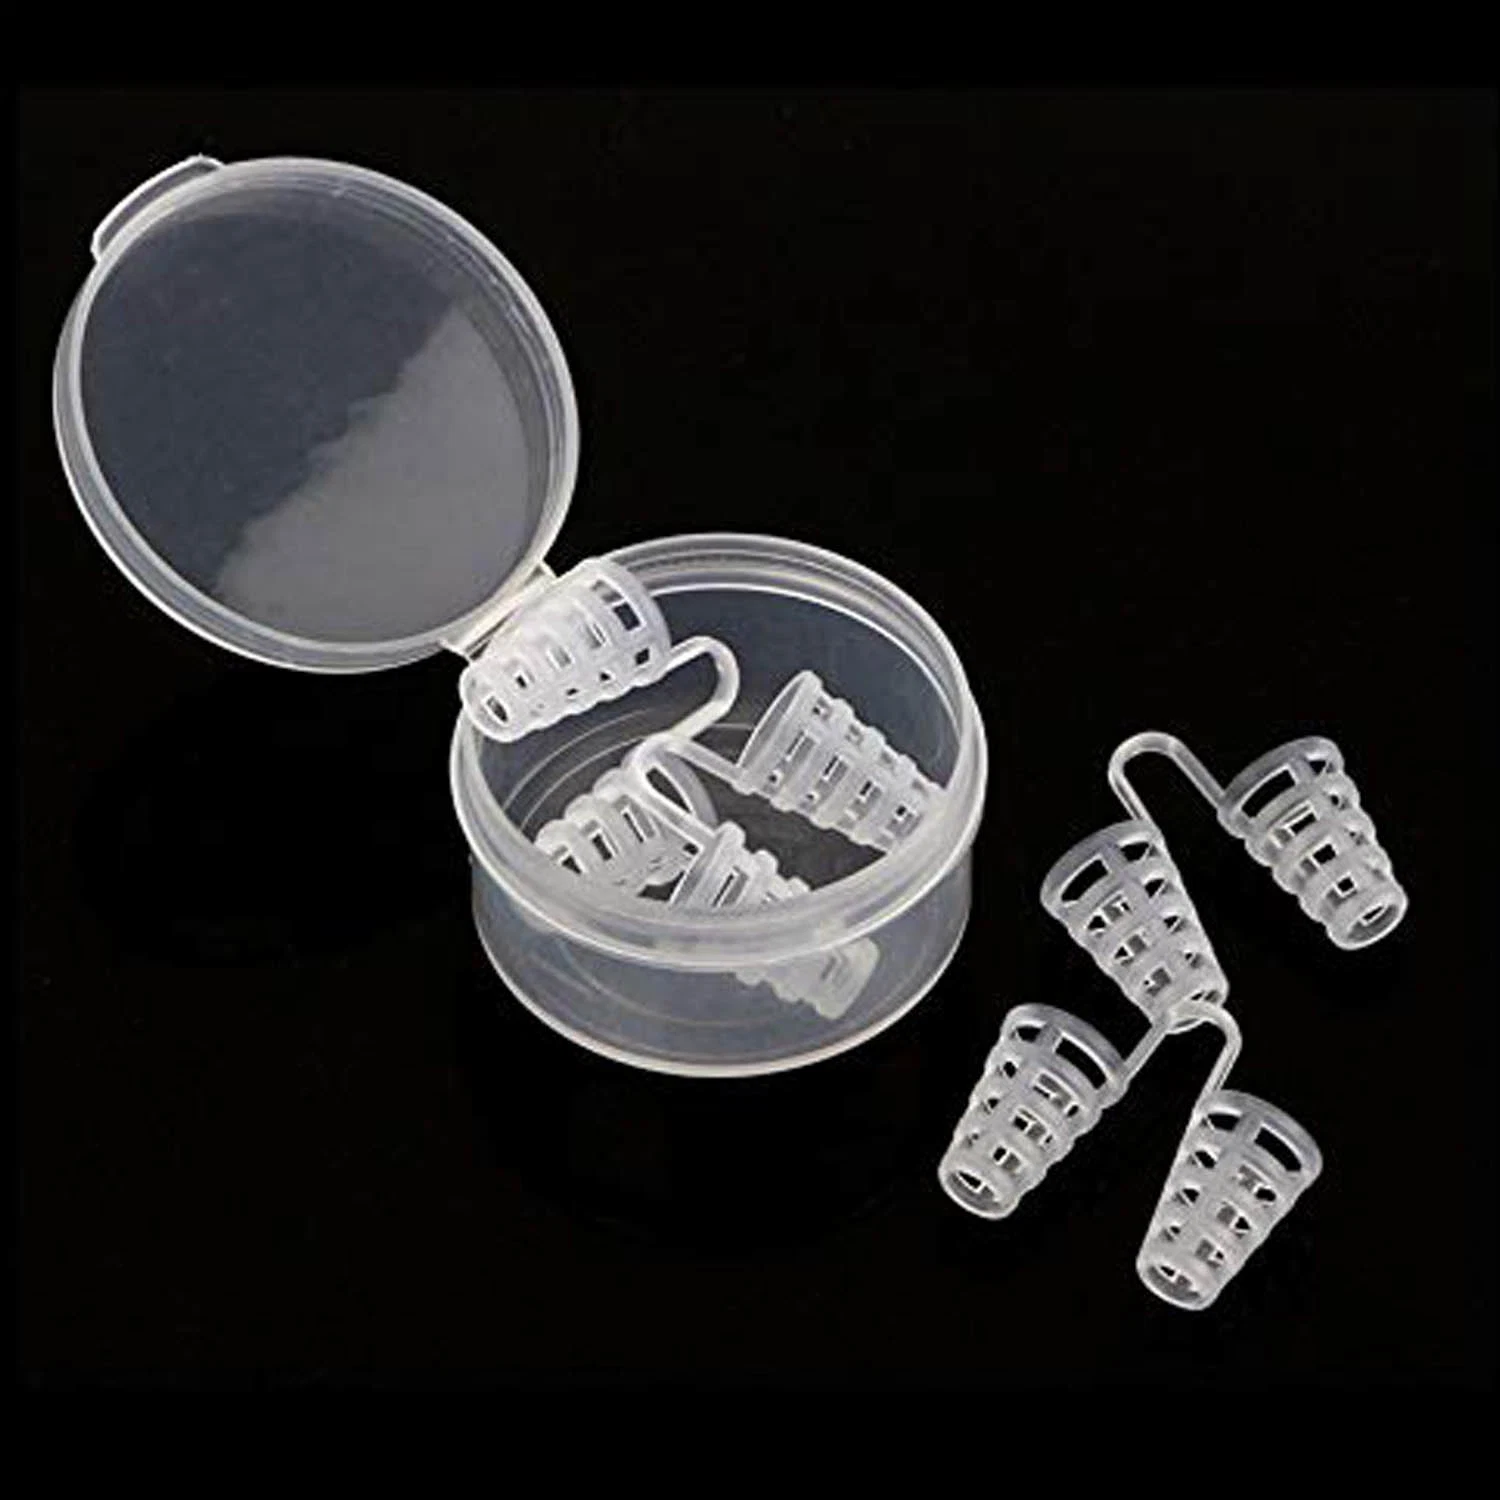 Nose Clips Anti Snoring to Prevent Snore Solution